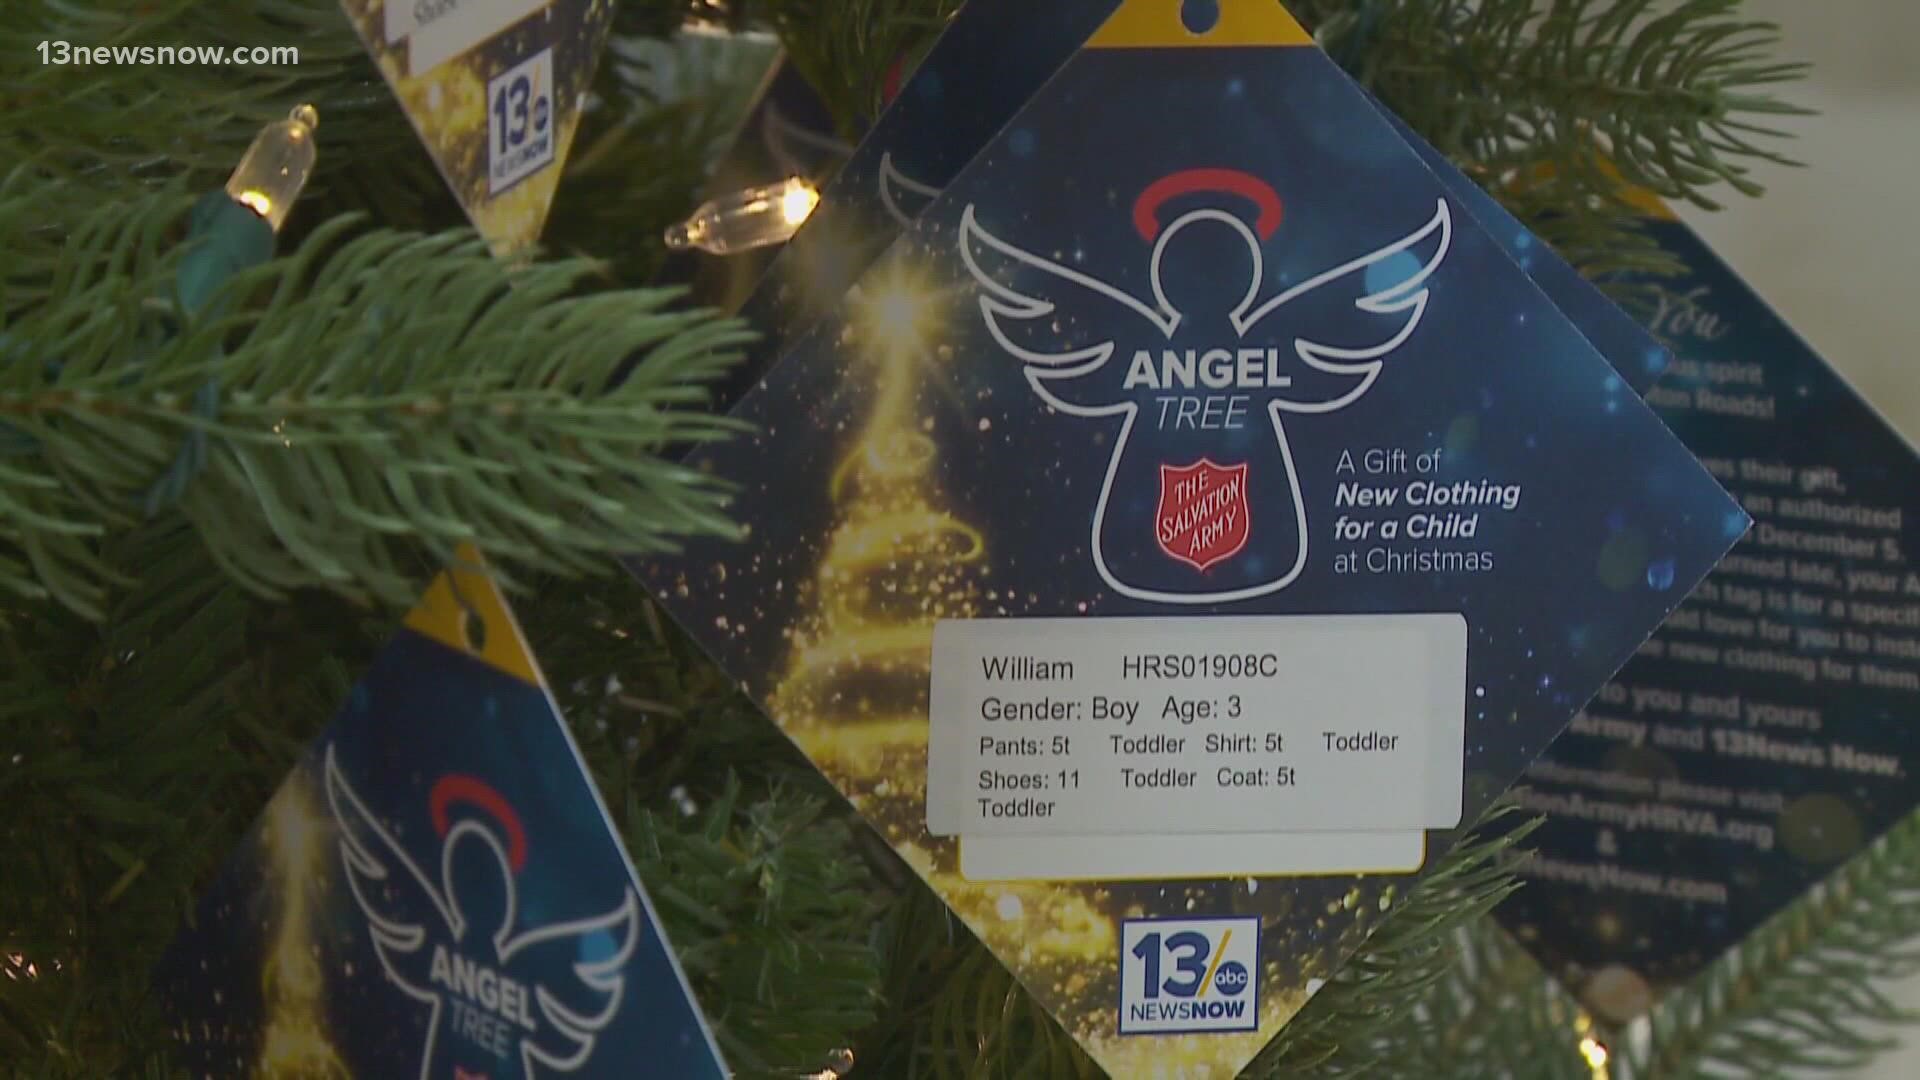 The group makes sure kids all across the area have new toys and clothes for the holidays.